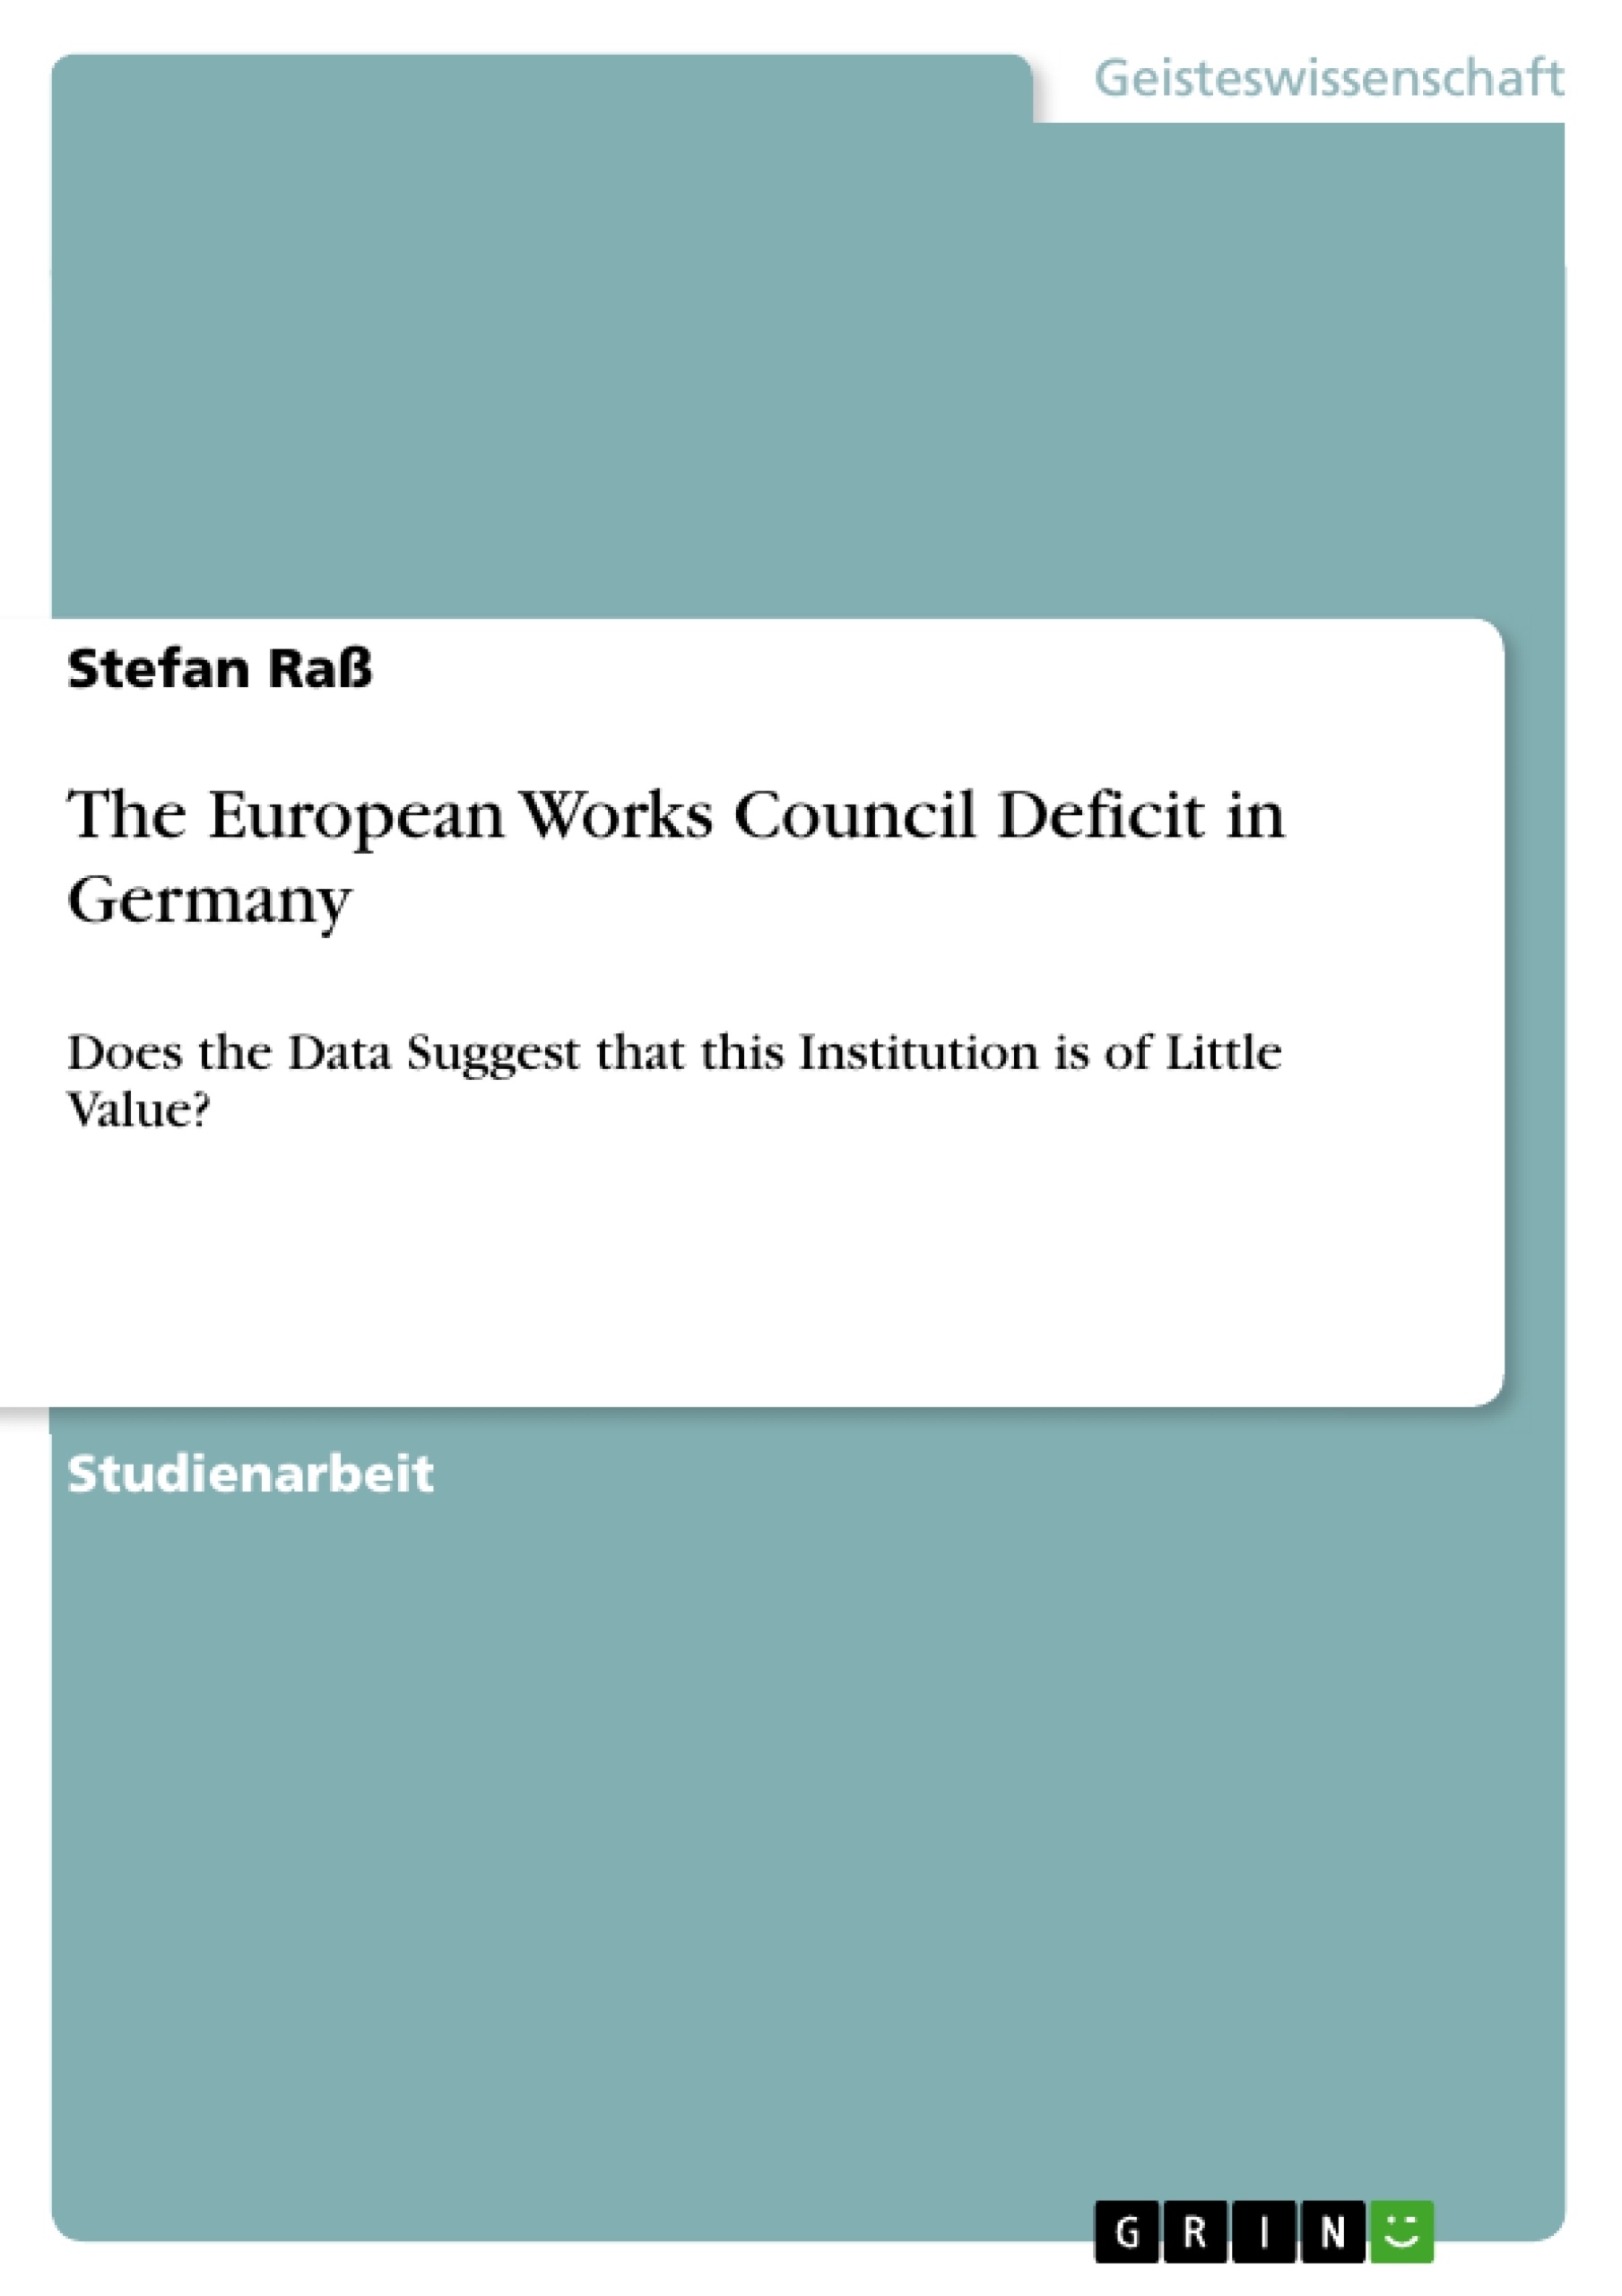 Titel: The European Works Council Deficit in Germany